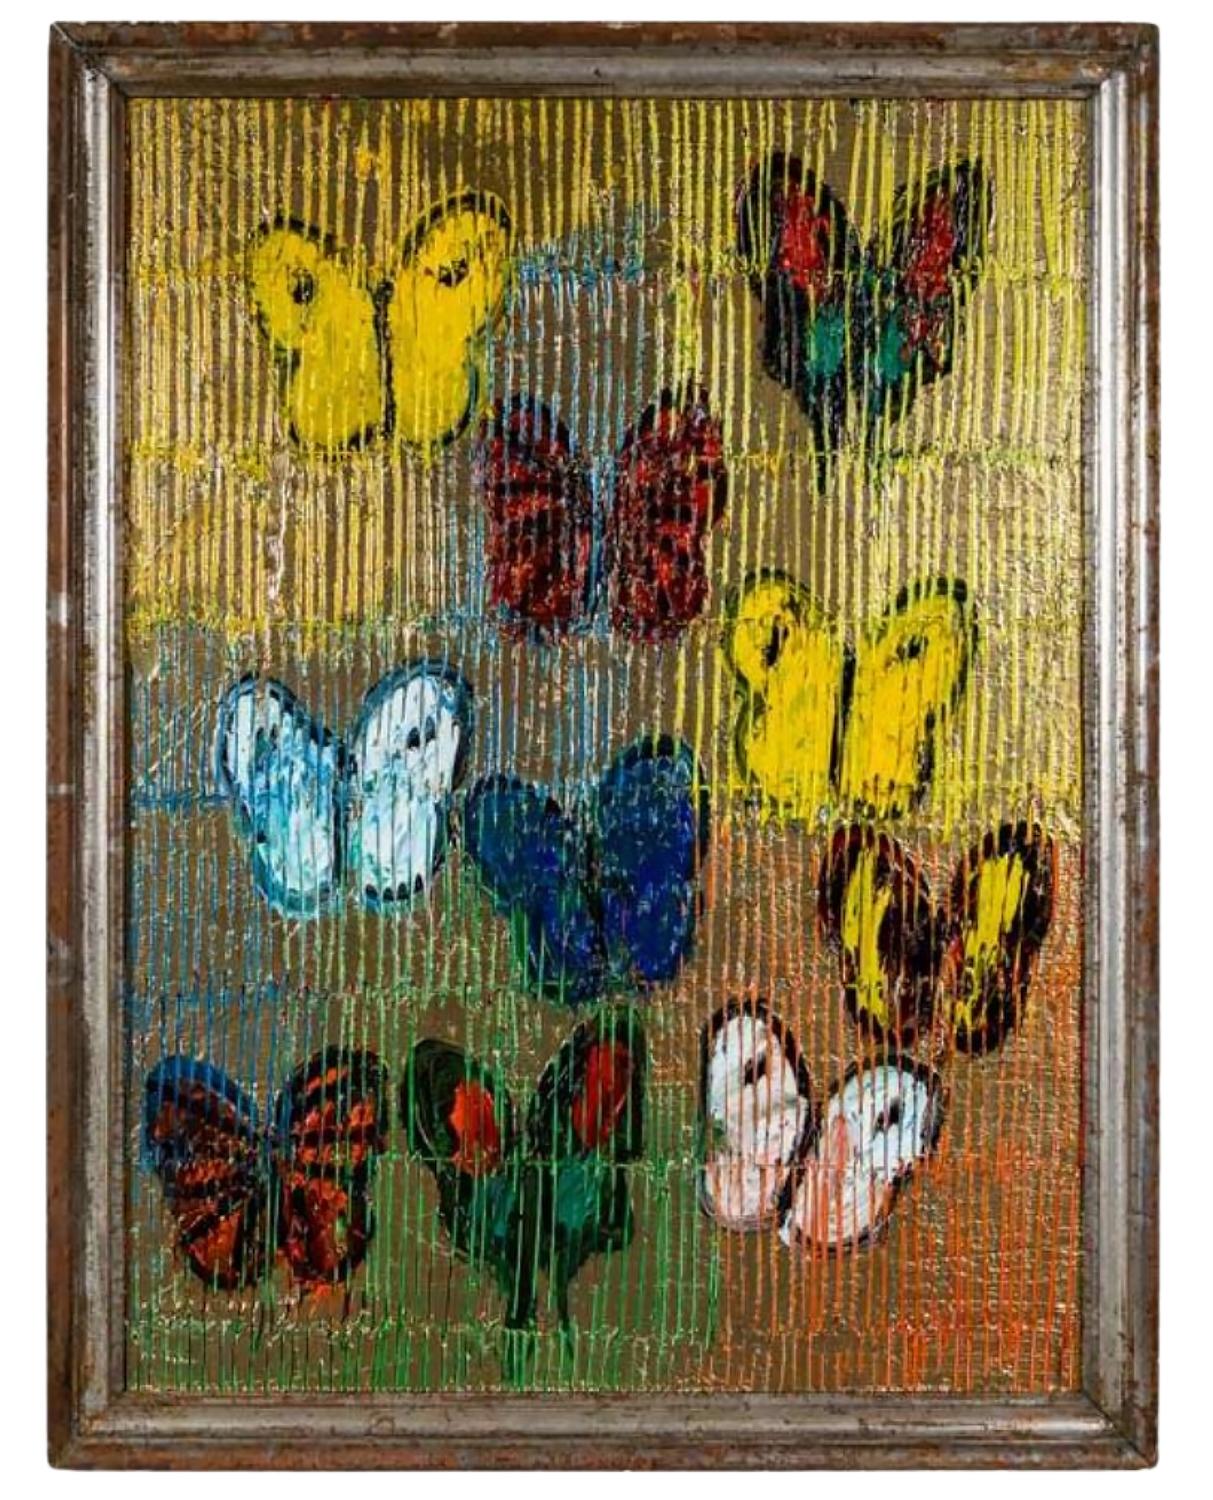 Hunt Slonem, "Field Goals", Colorful Gold Butterfly Oil Painting Antique Frame